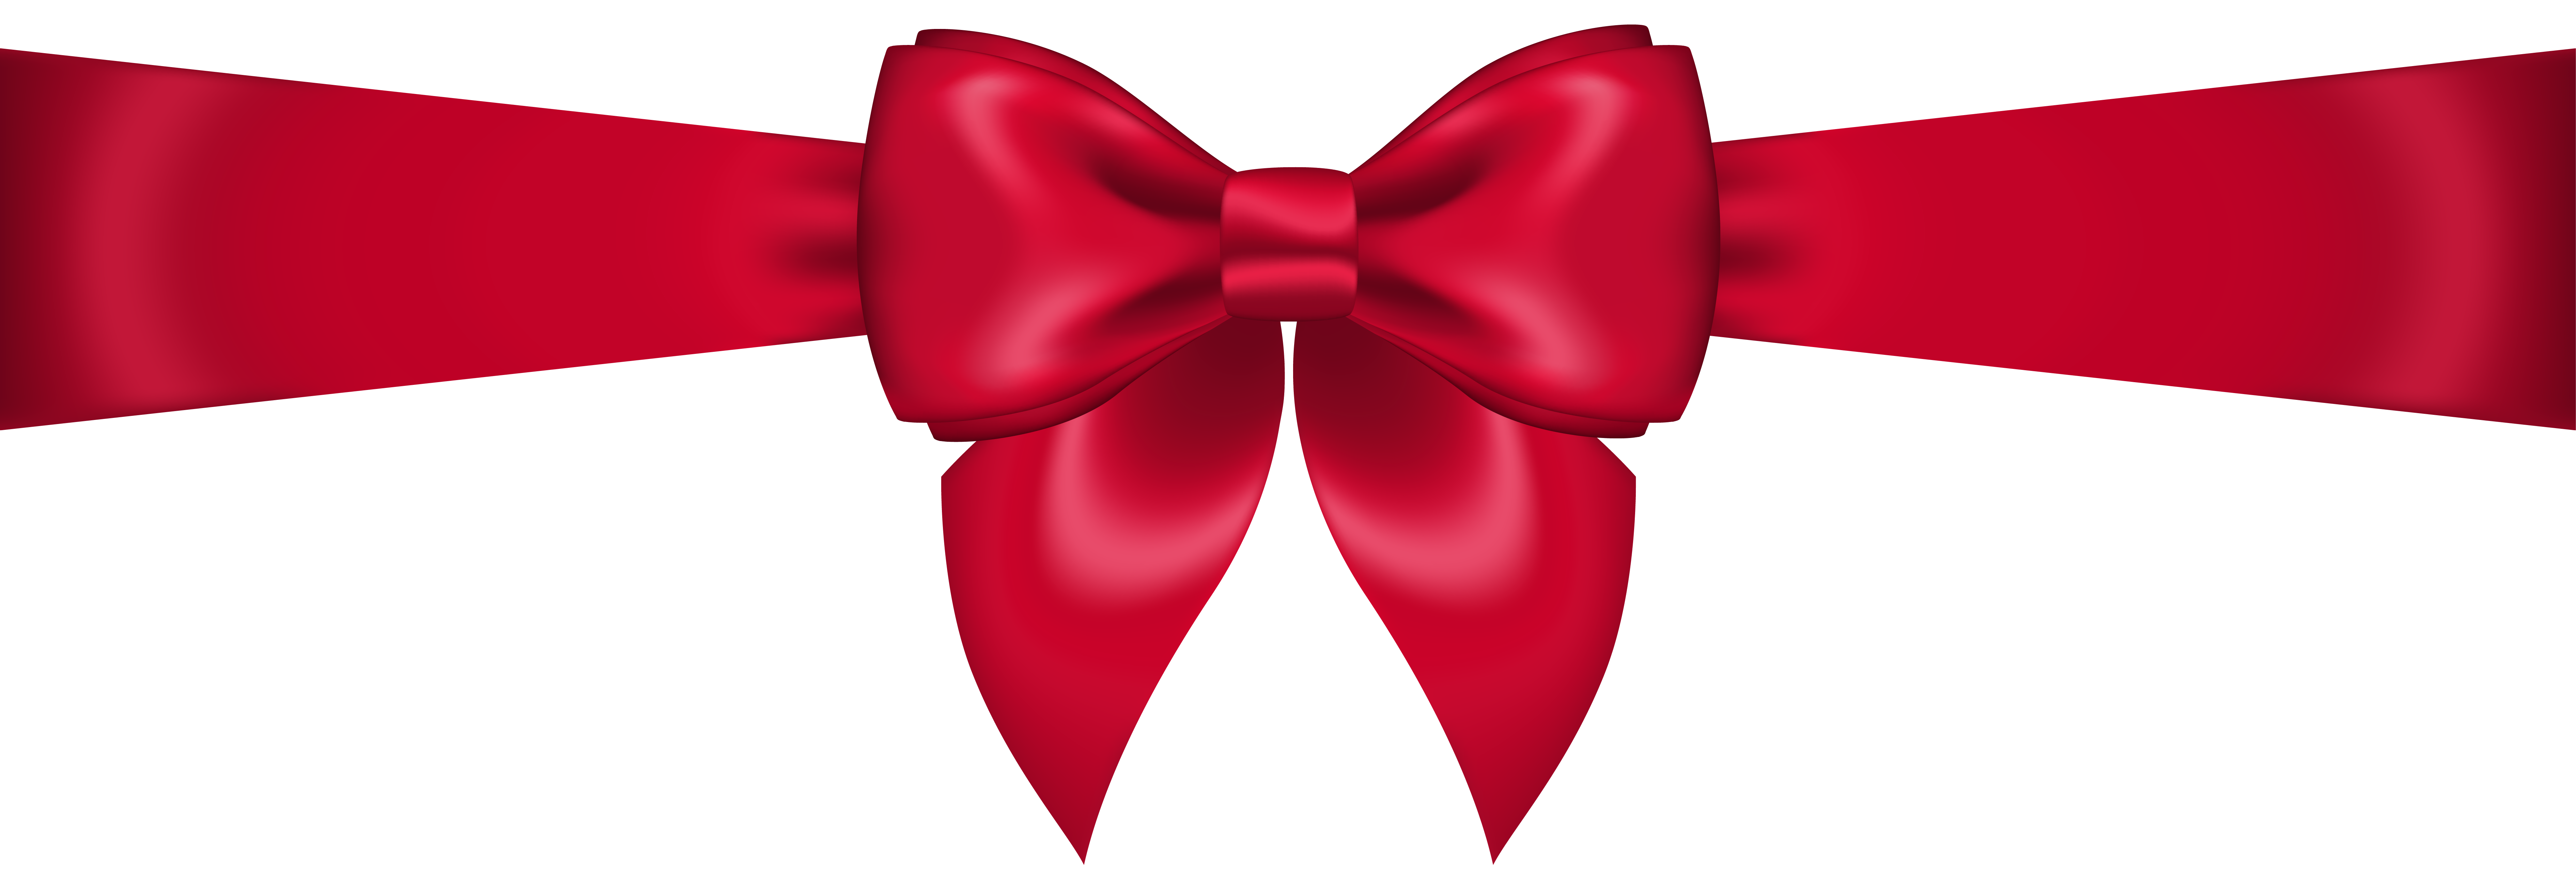 Red Bow Transparent PNG Clip Art Image